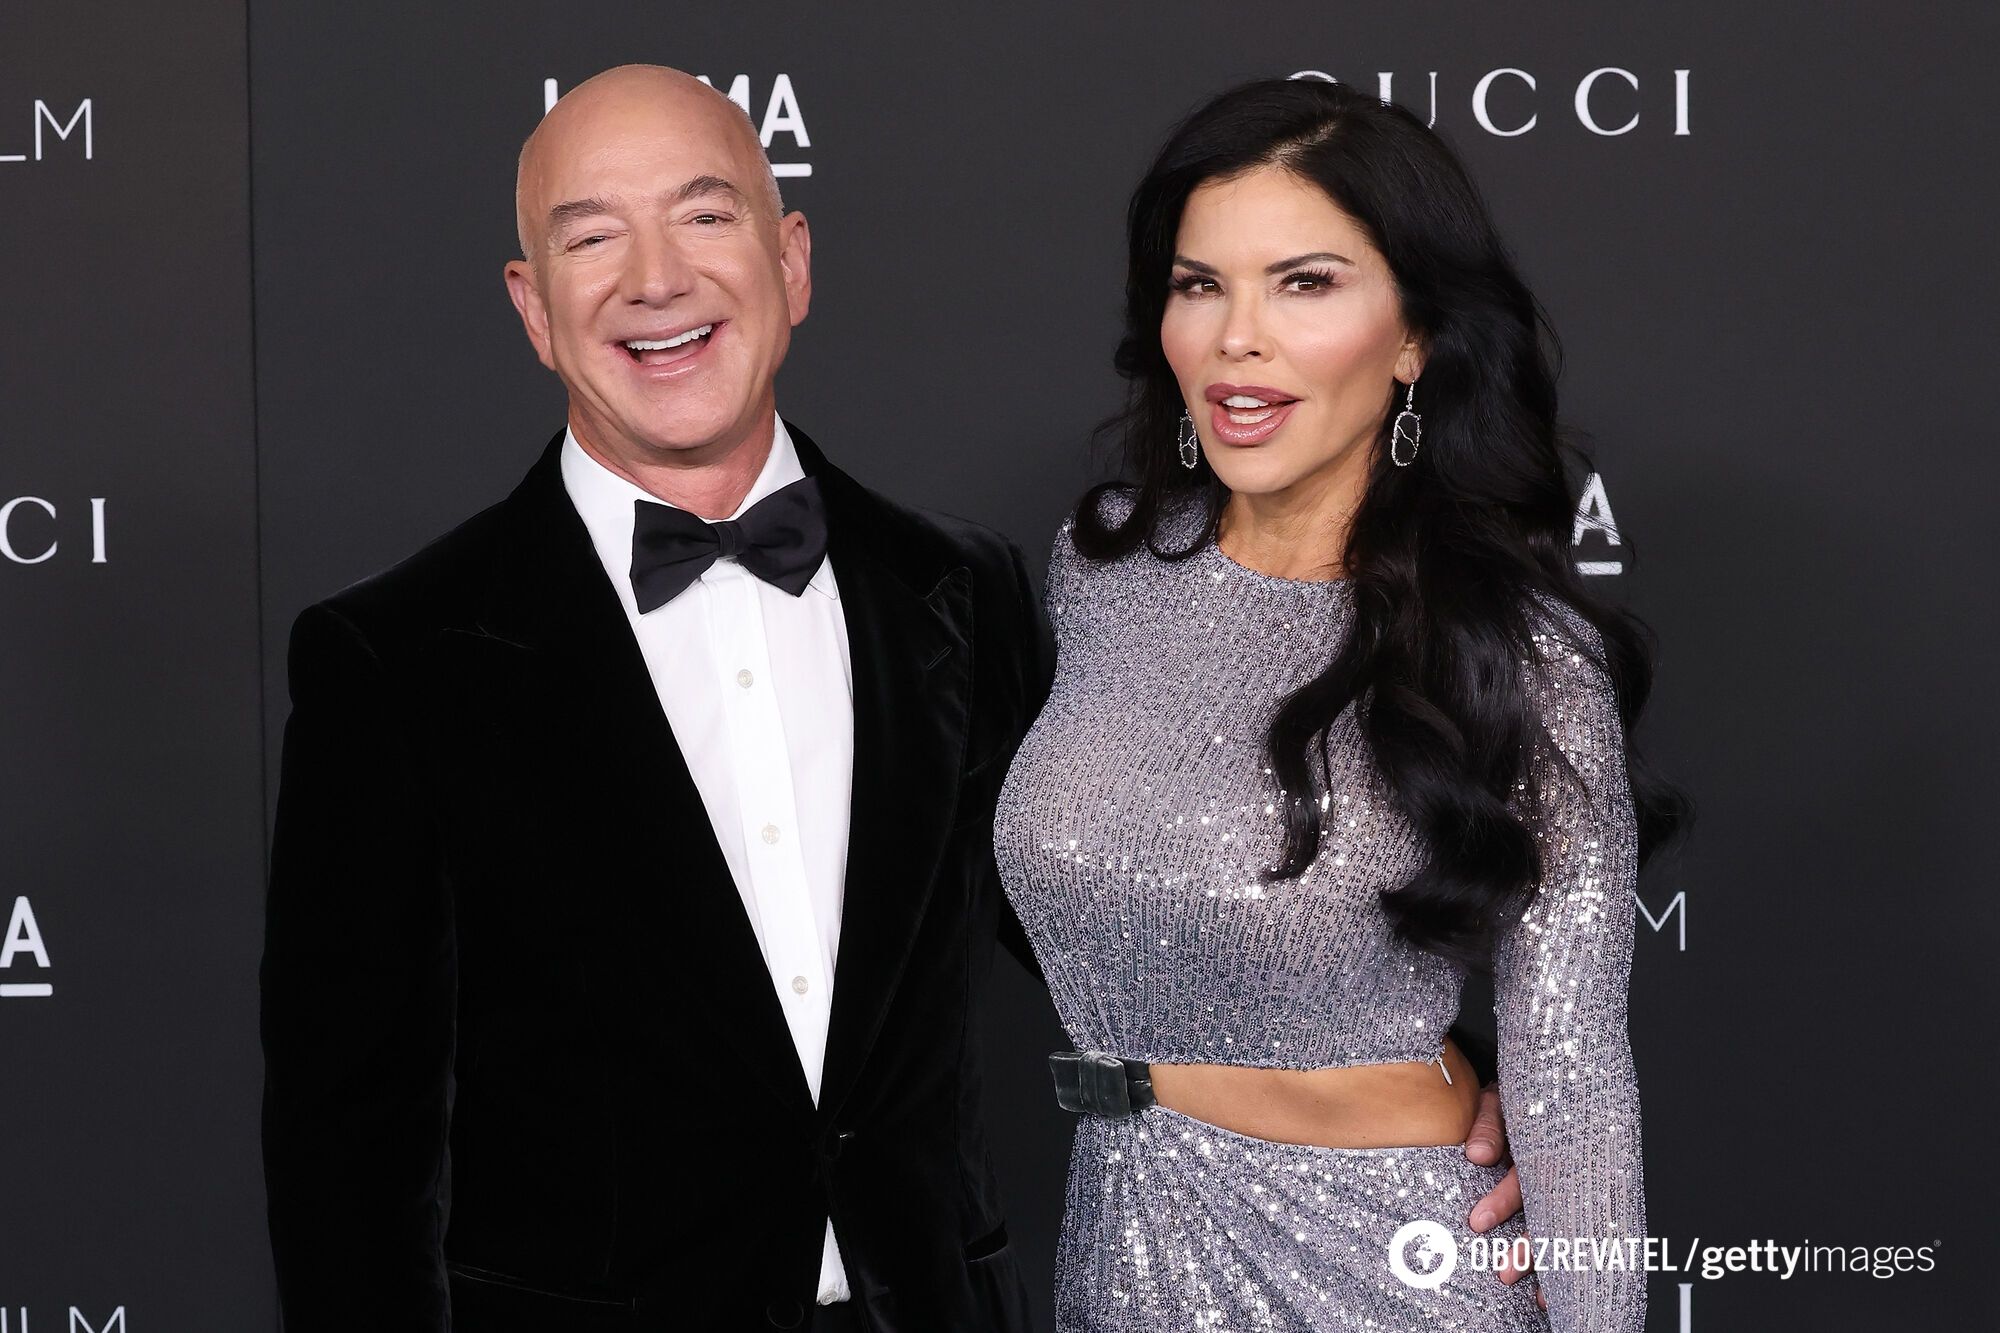 Disgraced on all fronts: one of the richest men in the world, Jeff Bezos, and his fiancée were harshly criticized for their Vogue photo